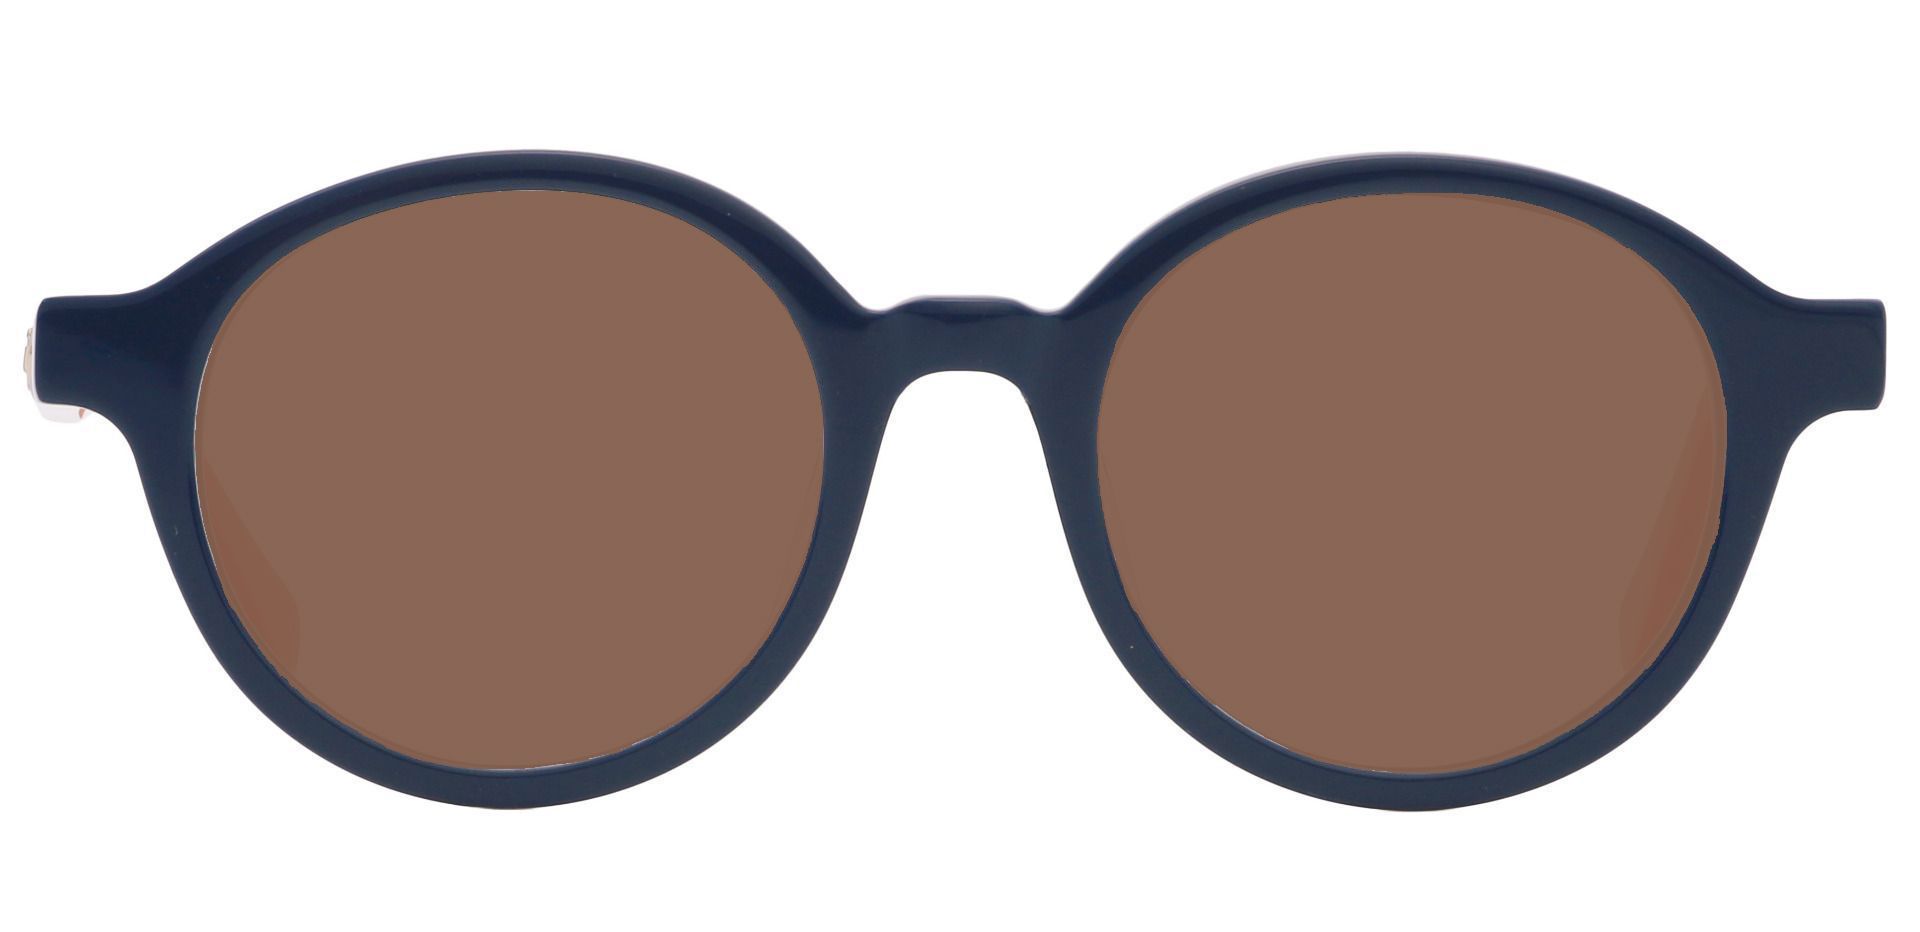 Dudley Round Single Vision Sunglasses - Blue Frame With Brown Lenses